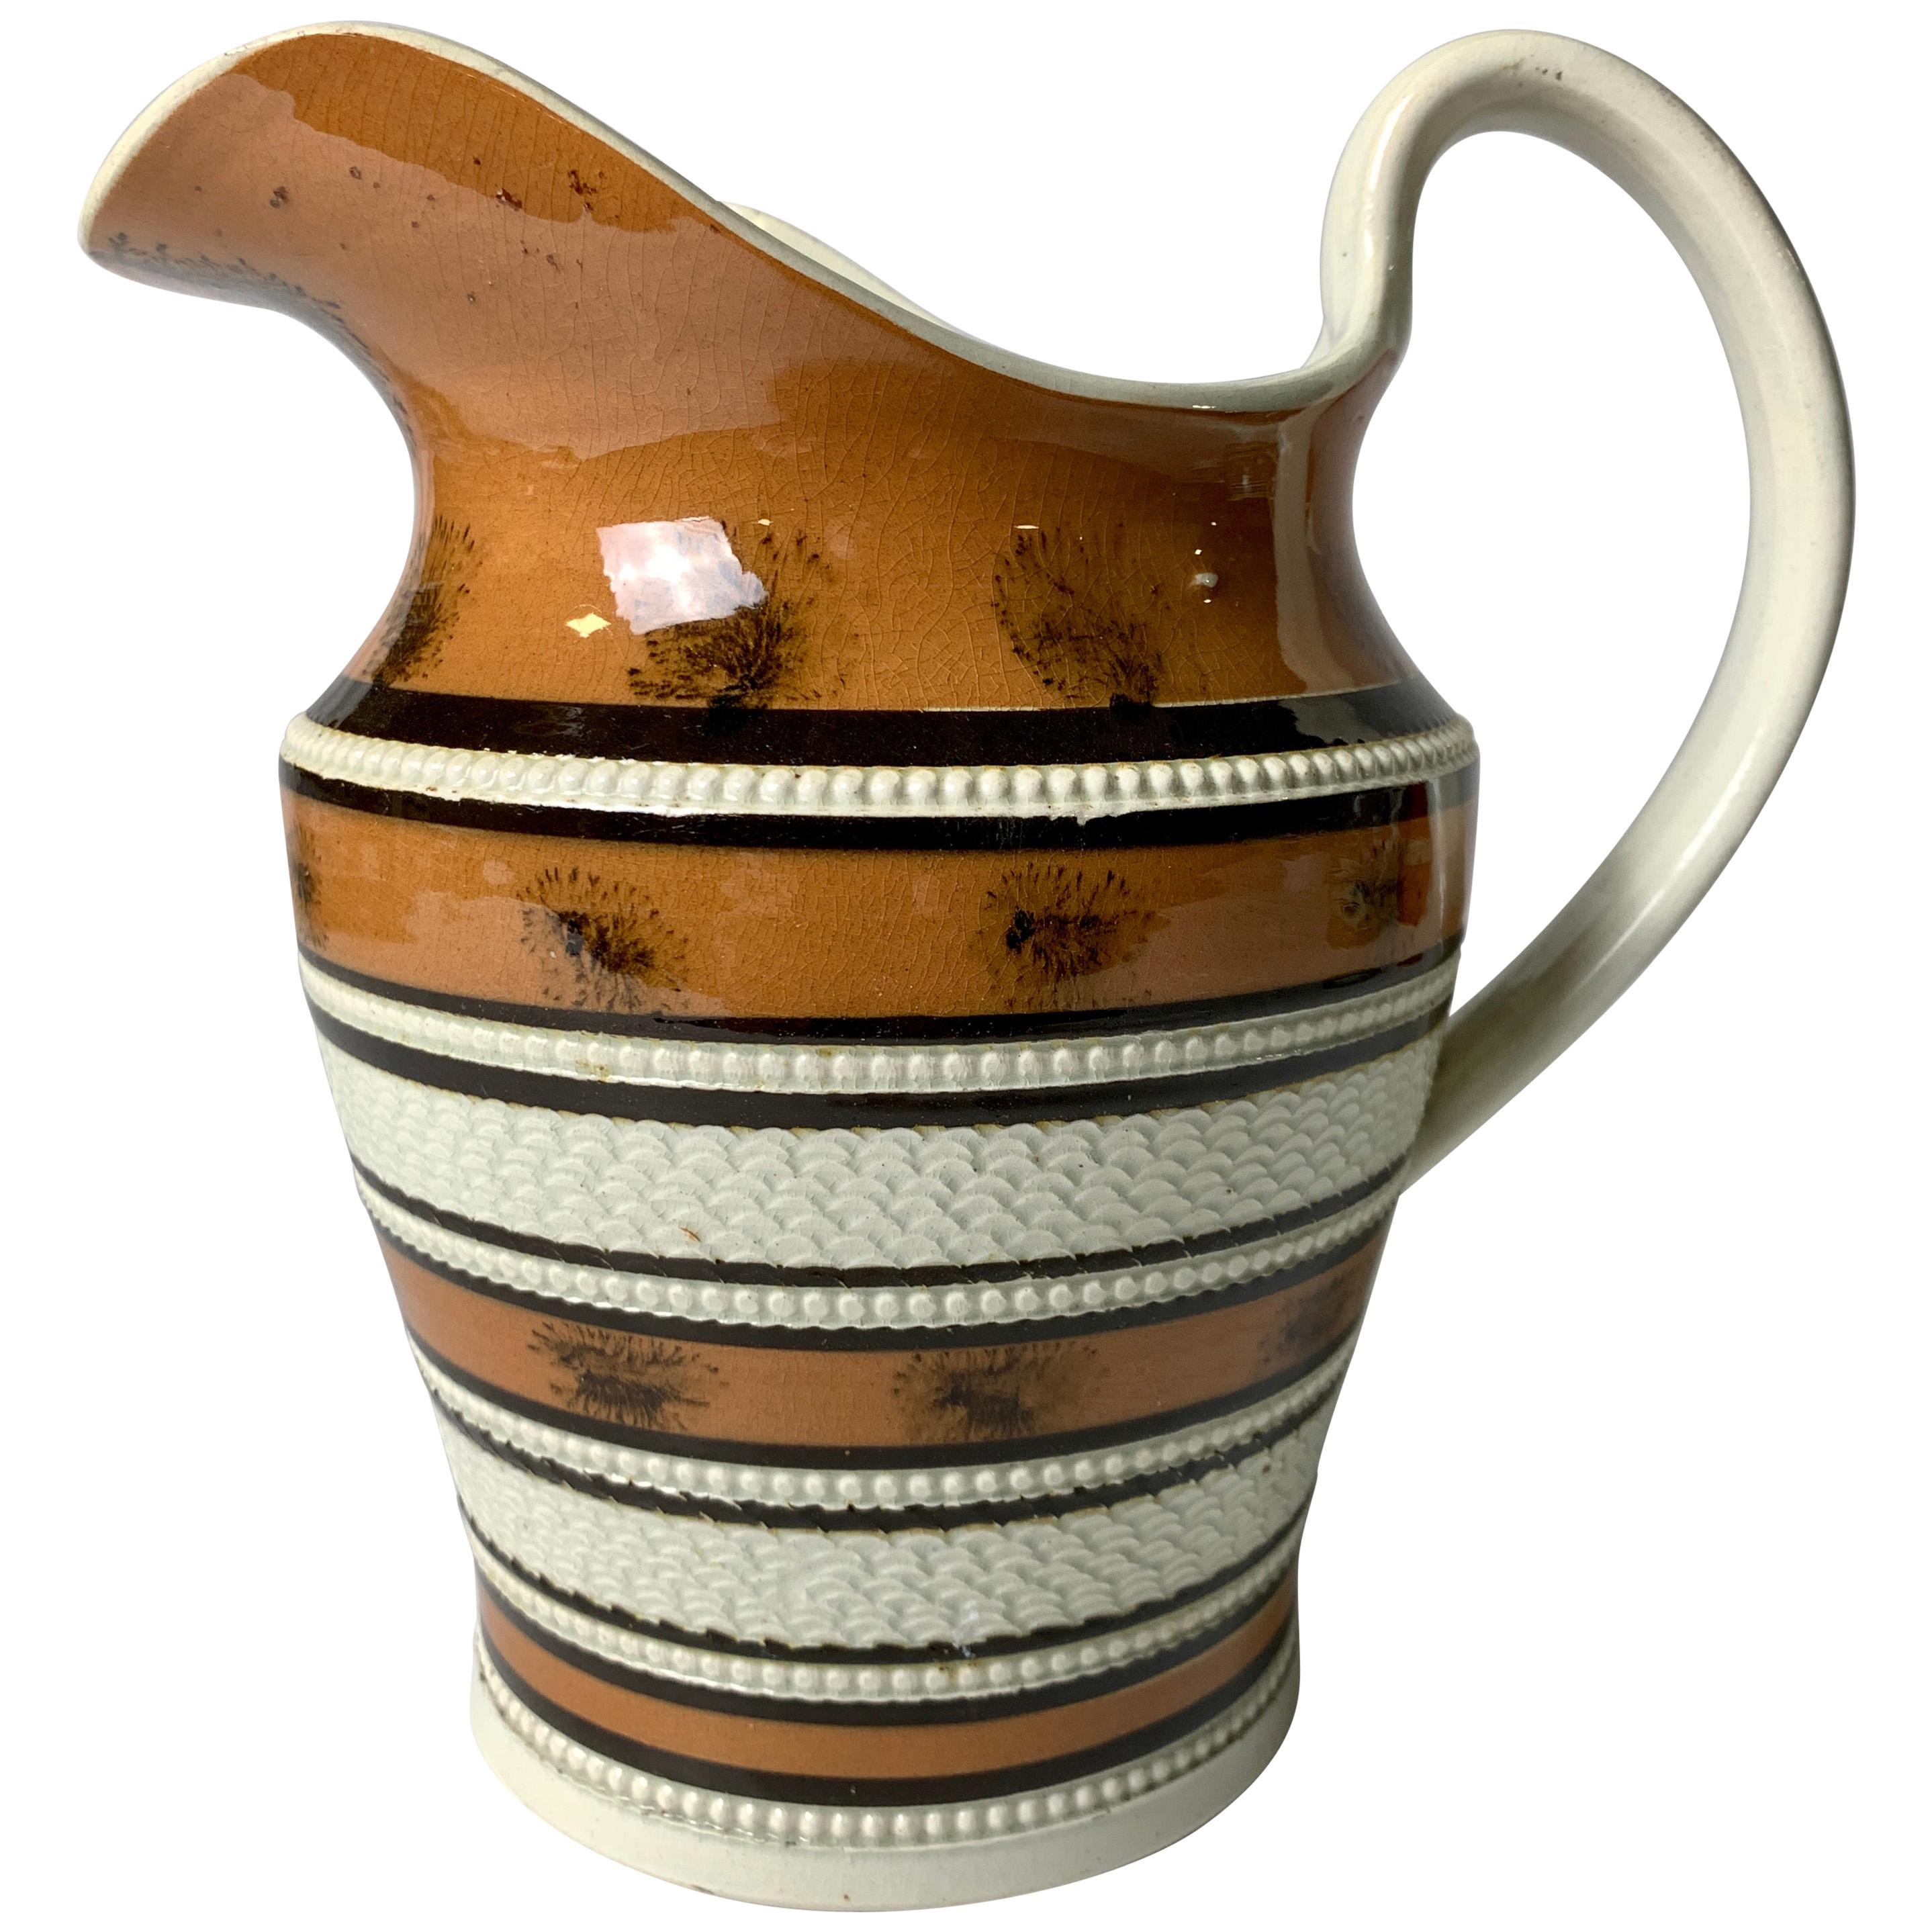 Mochaware Pitcher Decorated with ""Trees" and Seaweed" England, circa 1810